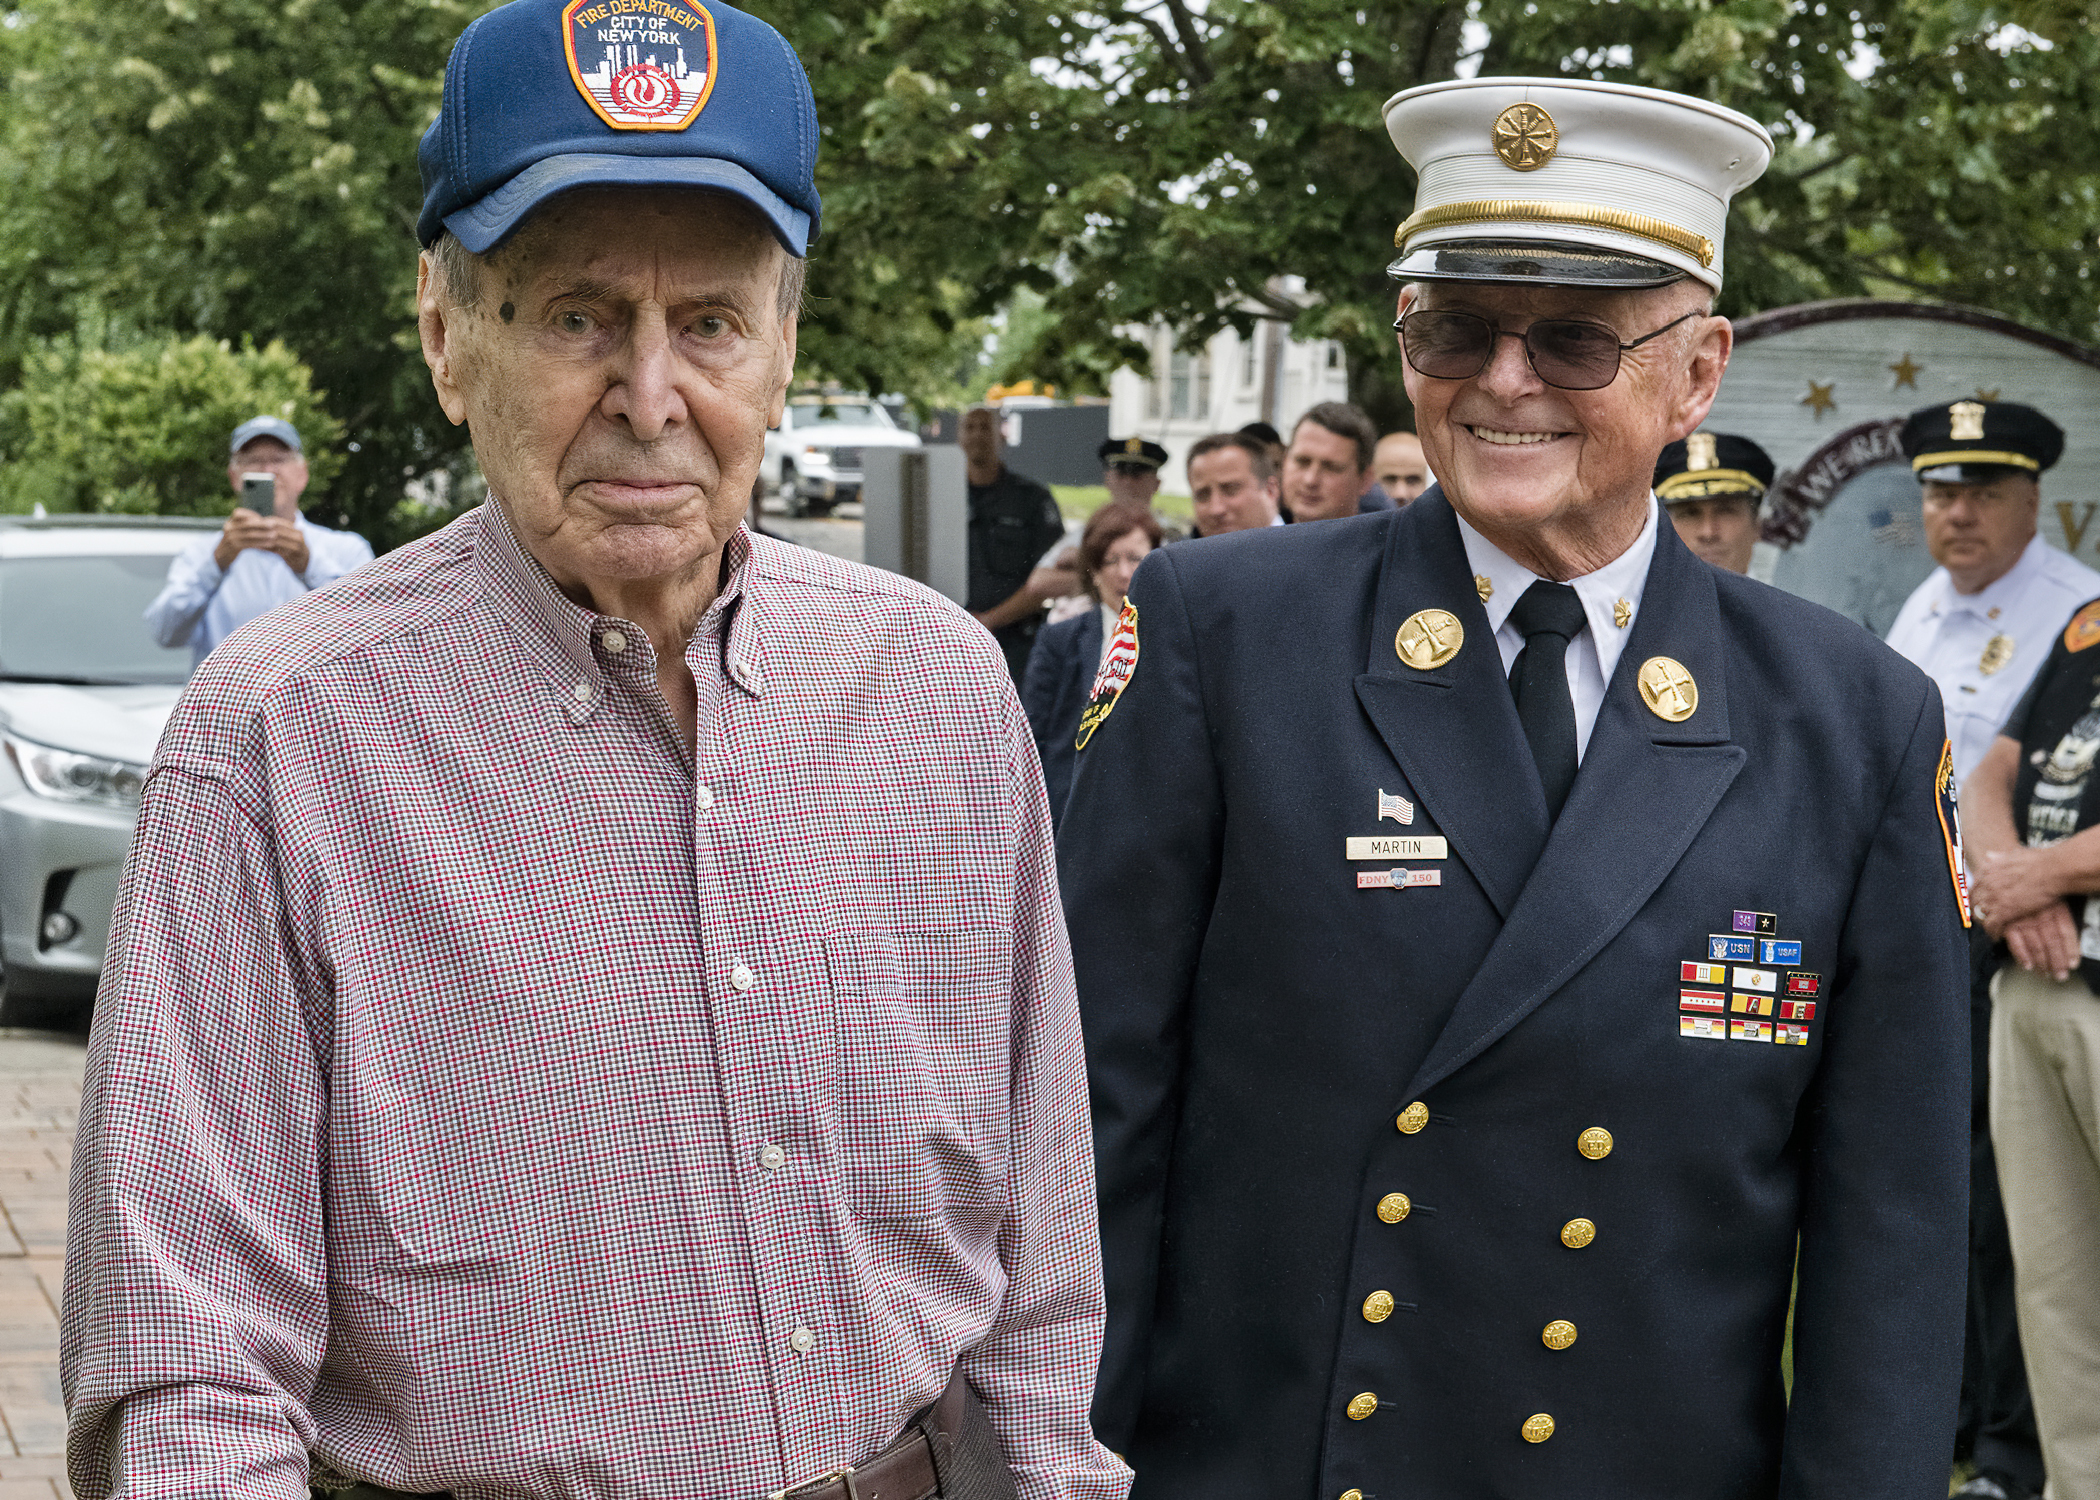 : VFW  Post 5350 in Westhampton Beach hosted a New York Fire Department ceremony honoring 99-year-old World War II veteran Chester Moscicki, of Center Moriches, on July 13. Mr. Moscicki, shown left arriving at the ceremony with retired NYFD Chief Thomas Martin, served as a tail gunner on a B-26, flying more than 35 missions over Japan. He was credited with shooting down a Japanese Zero and survived a crash landing on the island of Tinian. After the war he joined the NYFD where he served for more than 30 years, retiring with the rank of captain.